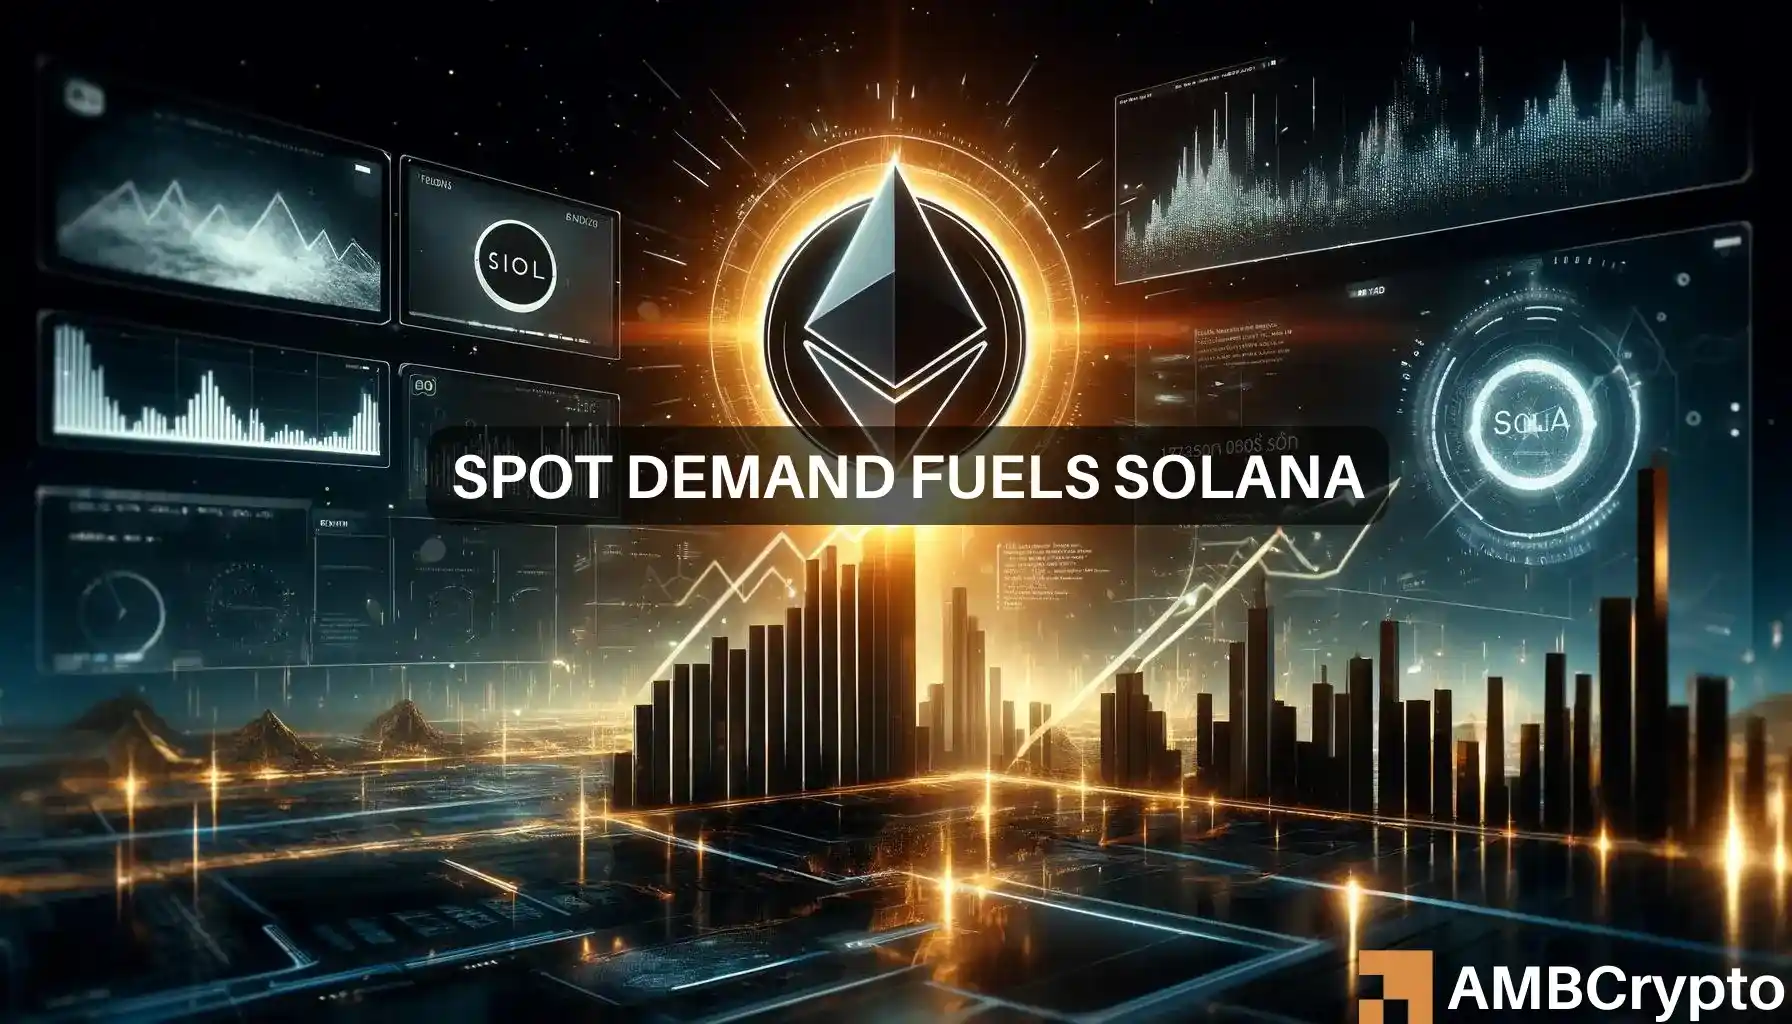 Solana indicators show low demand – Should you be worried?